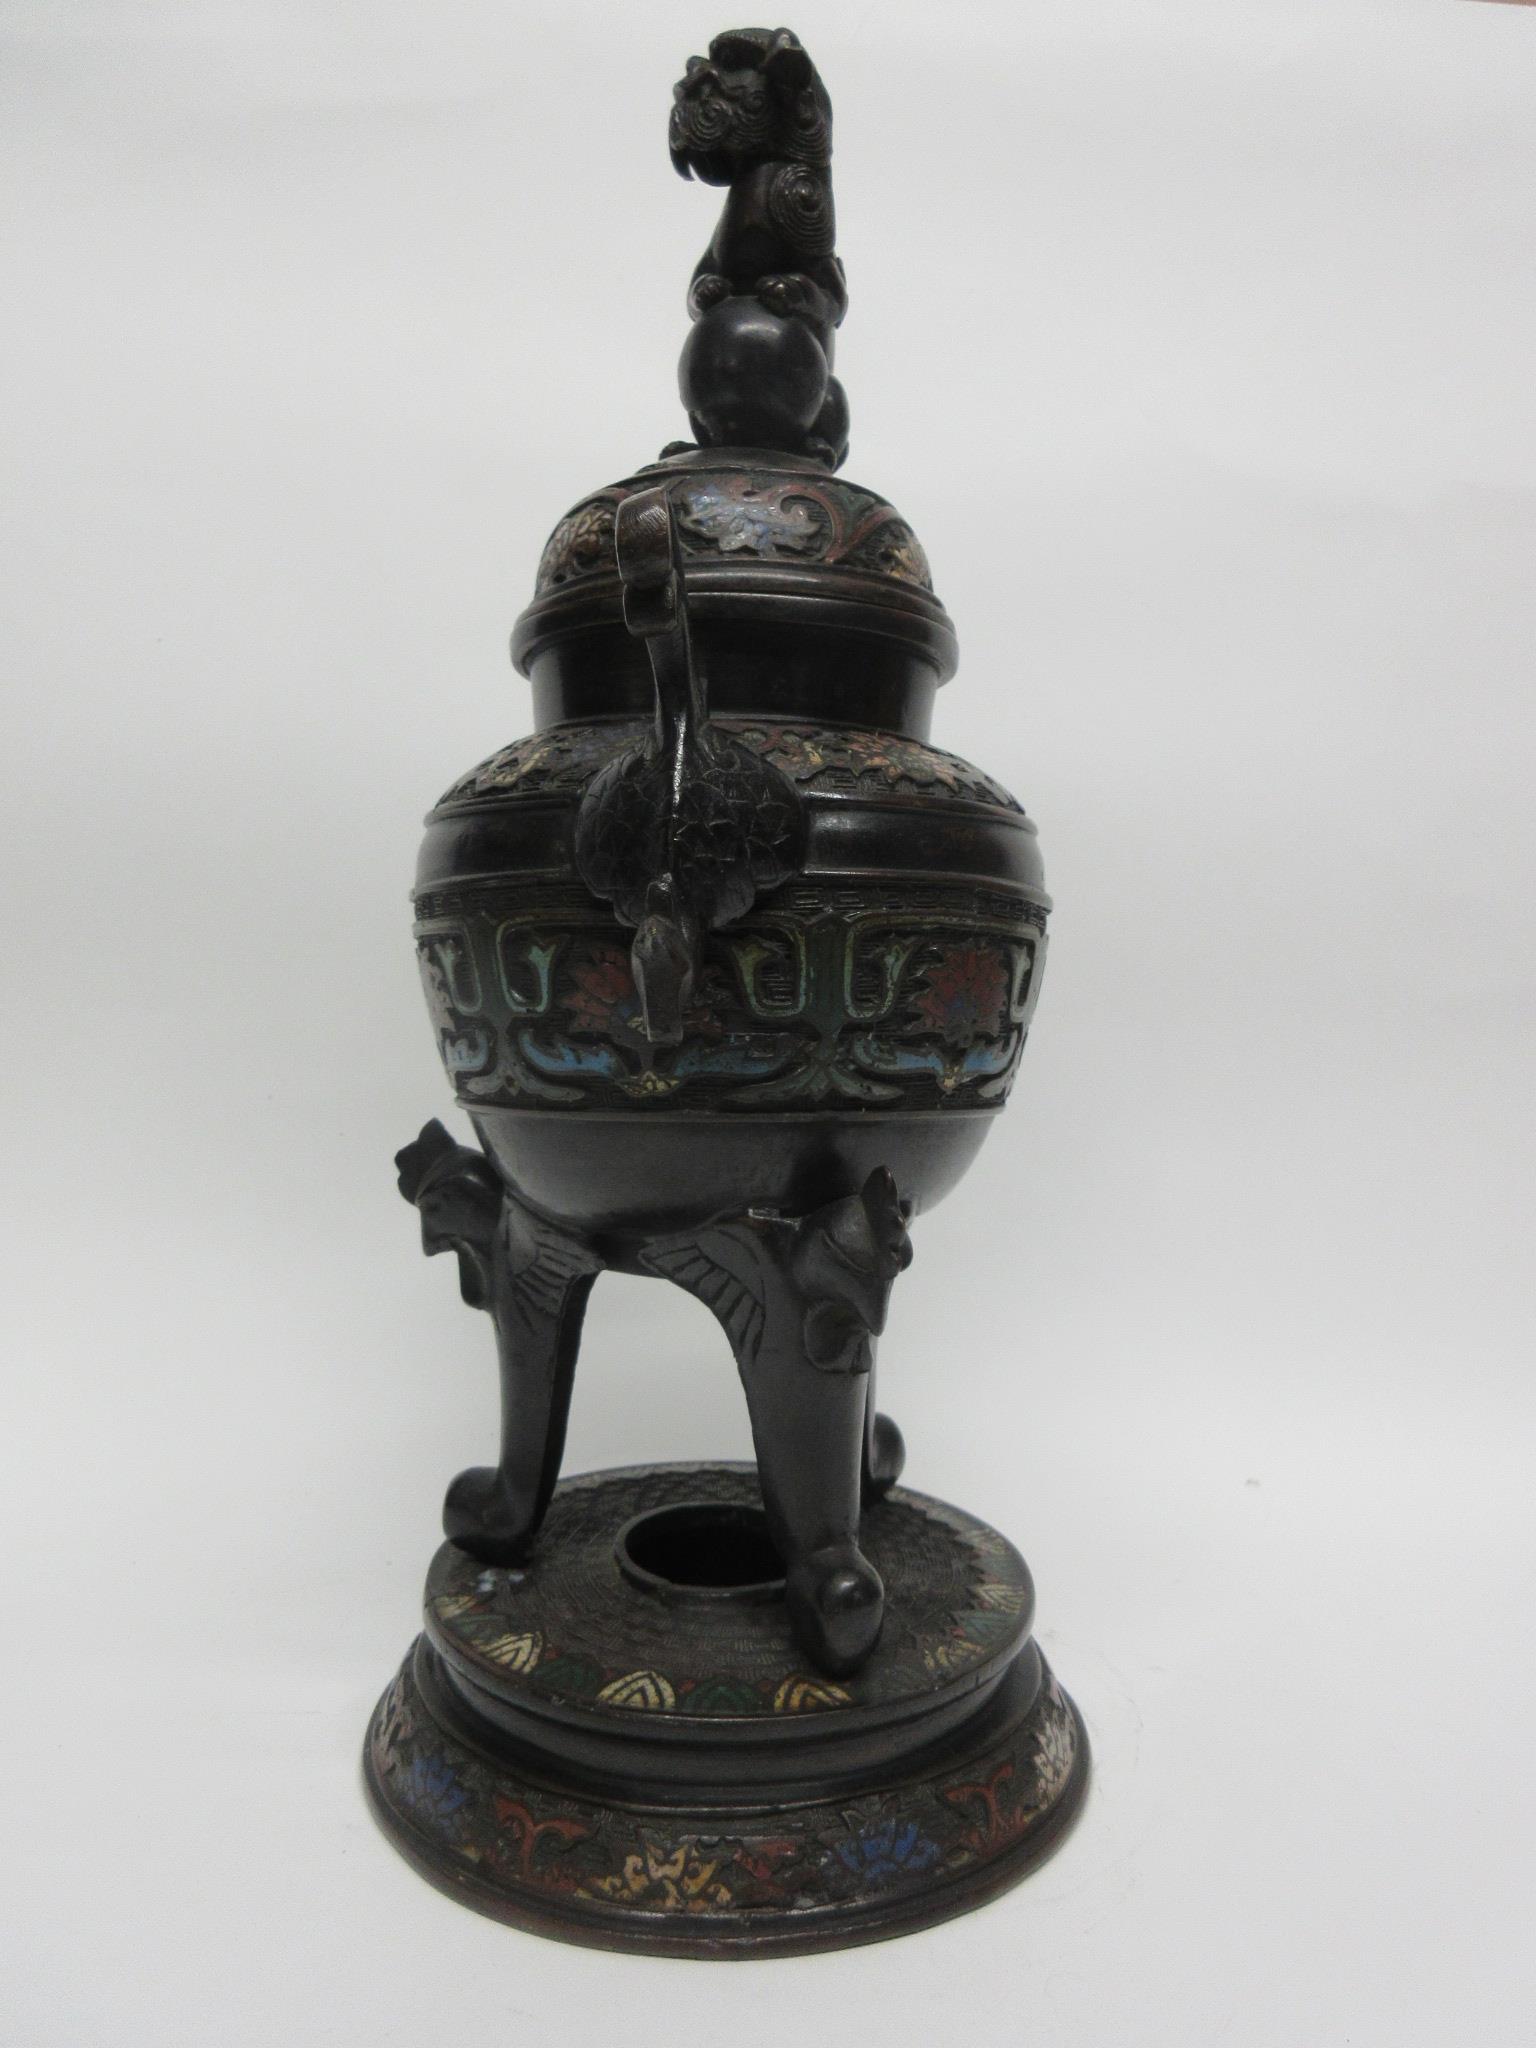 Large metal bronzed jar and cover with lion finial, decorated in cloisonne style, standing on - Image 7 of 7